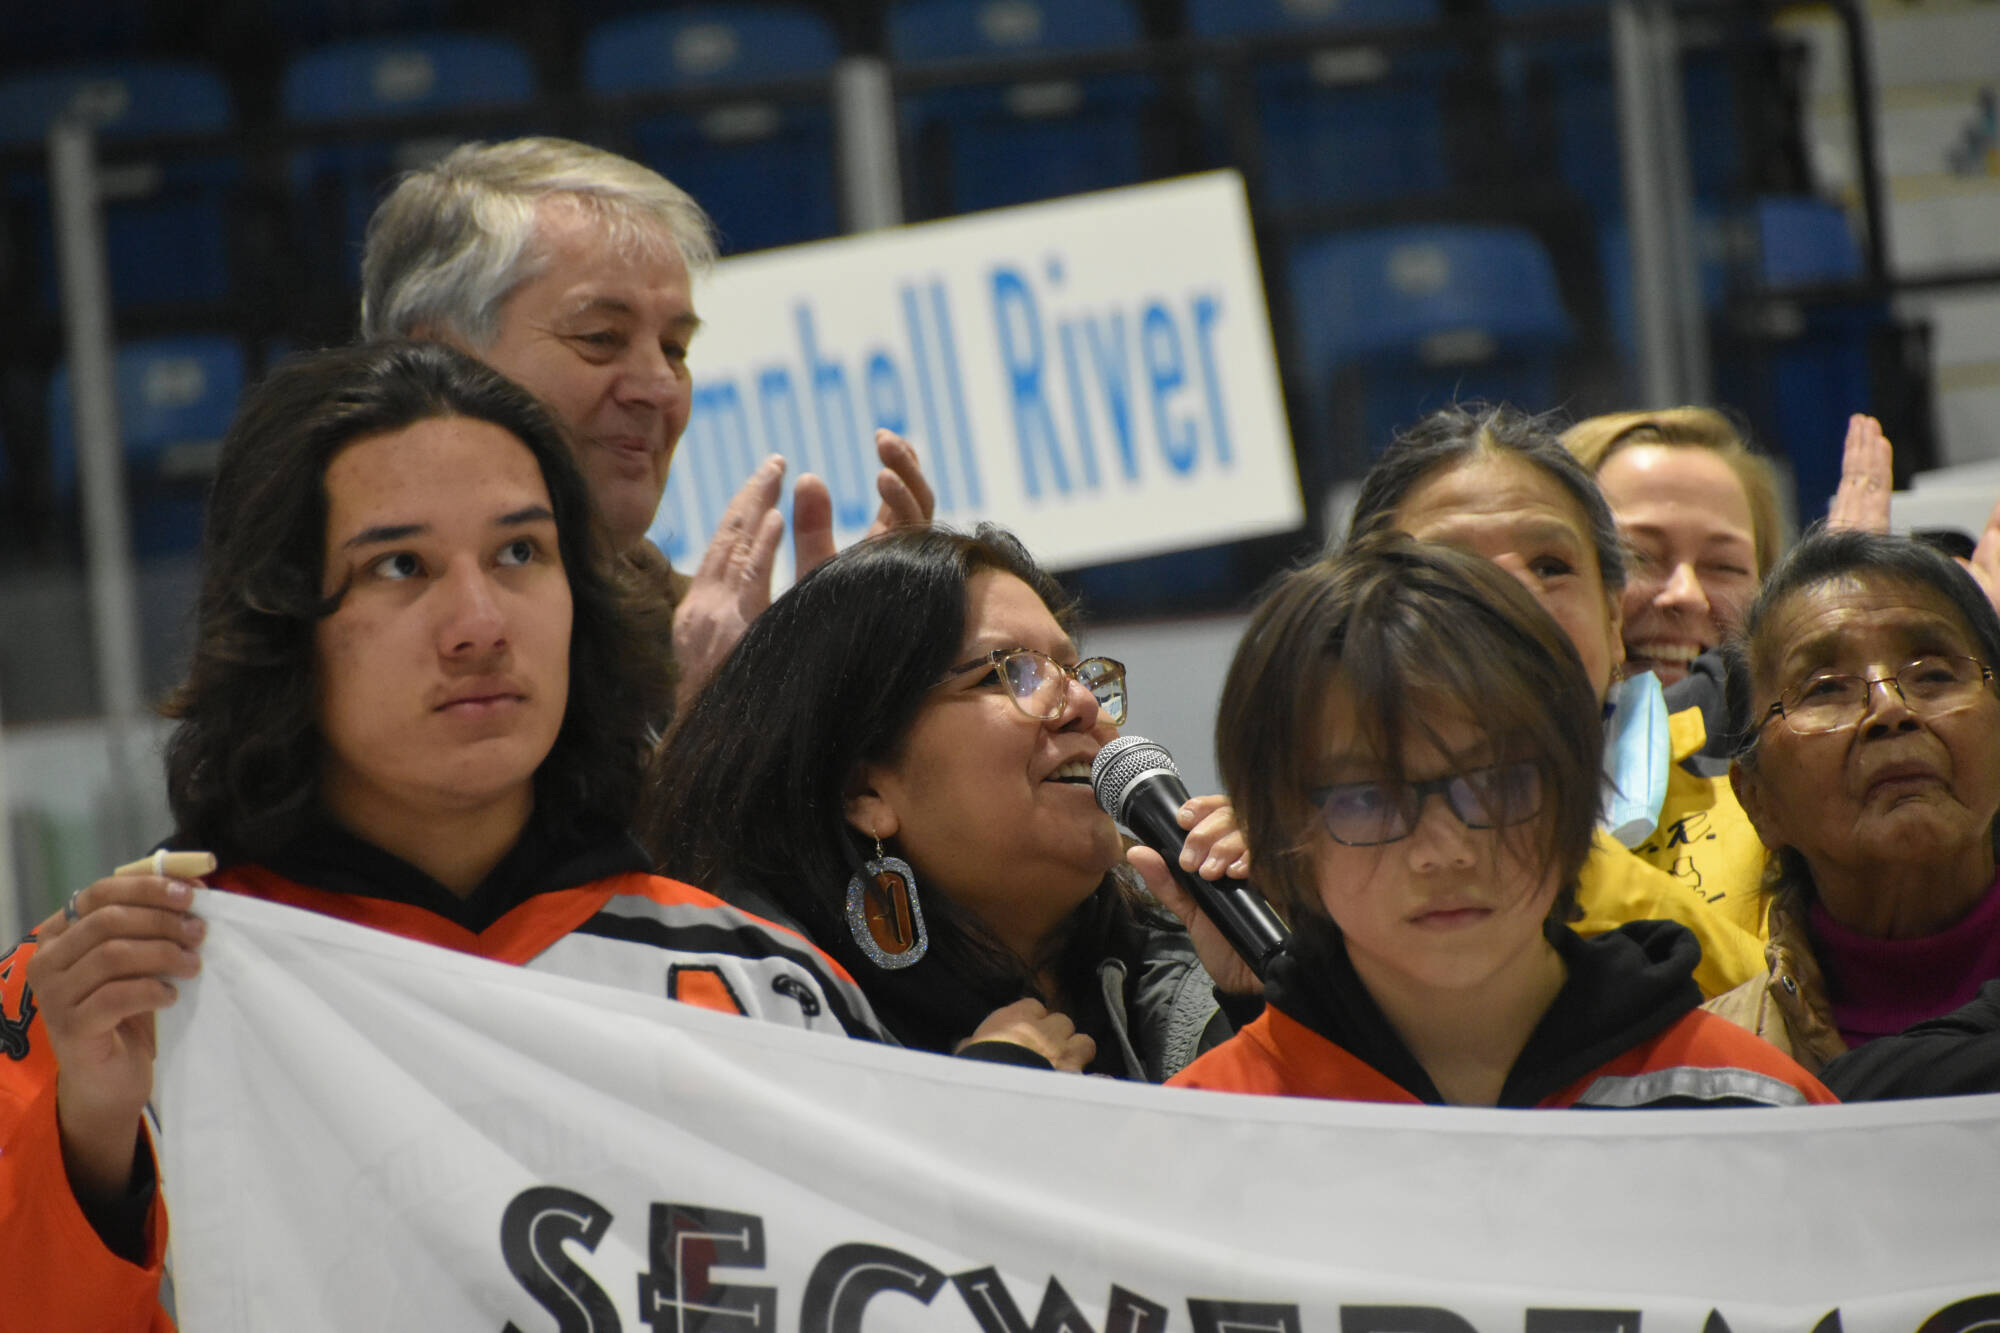 Adams Lake Band Kukpi7 (Chief) Lynn Kenoras-Duck Chief speaks to teams and supporters at the Shaw Centre’s Spectator Arena in Salmon Arm March 20 about the Secwépemc territory and flag, as it now hangs in place with the other flags in the arena. She and others spoke during the opening ceremonies of the BC Tier2 U13 championships running until March 23. (Martha Wickett - Salmon Arm Observer)